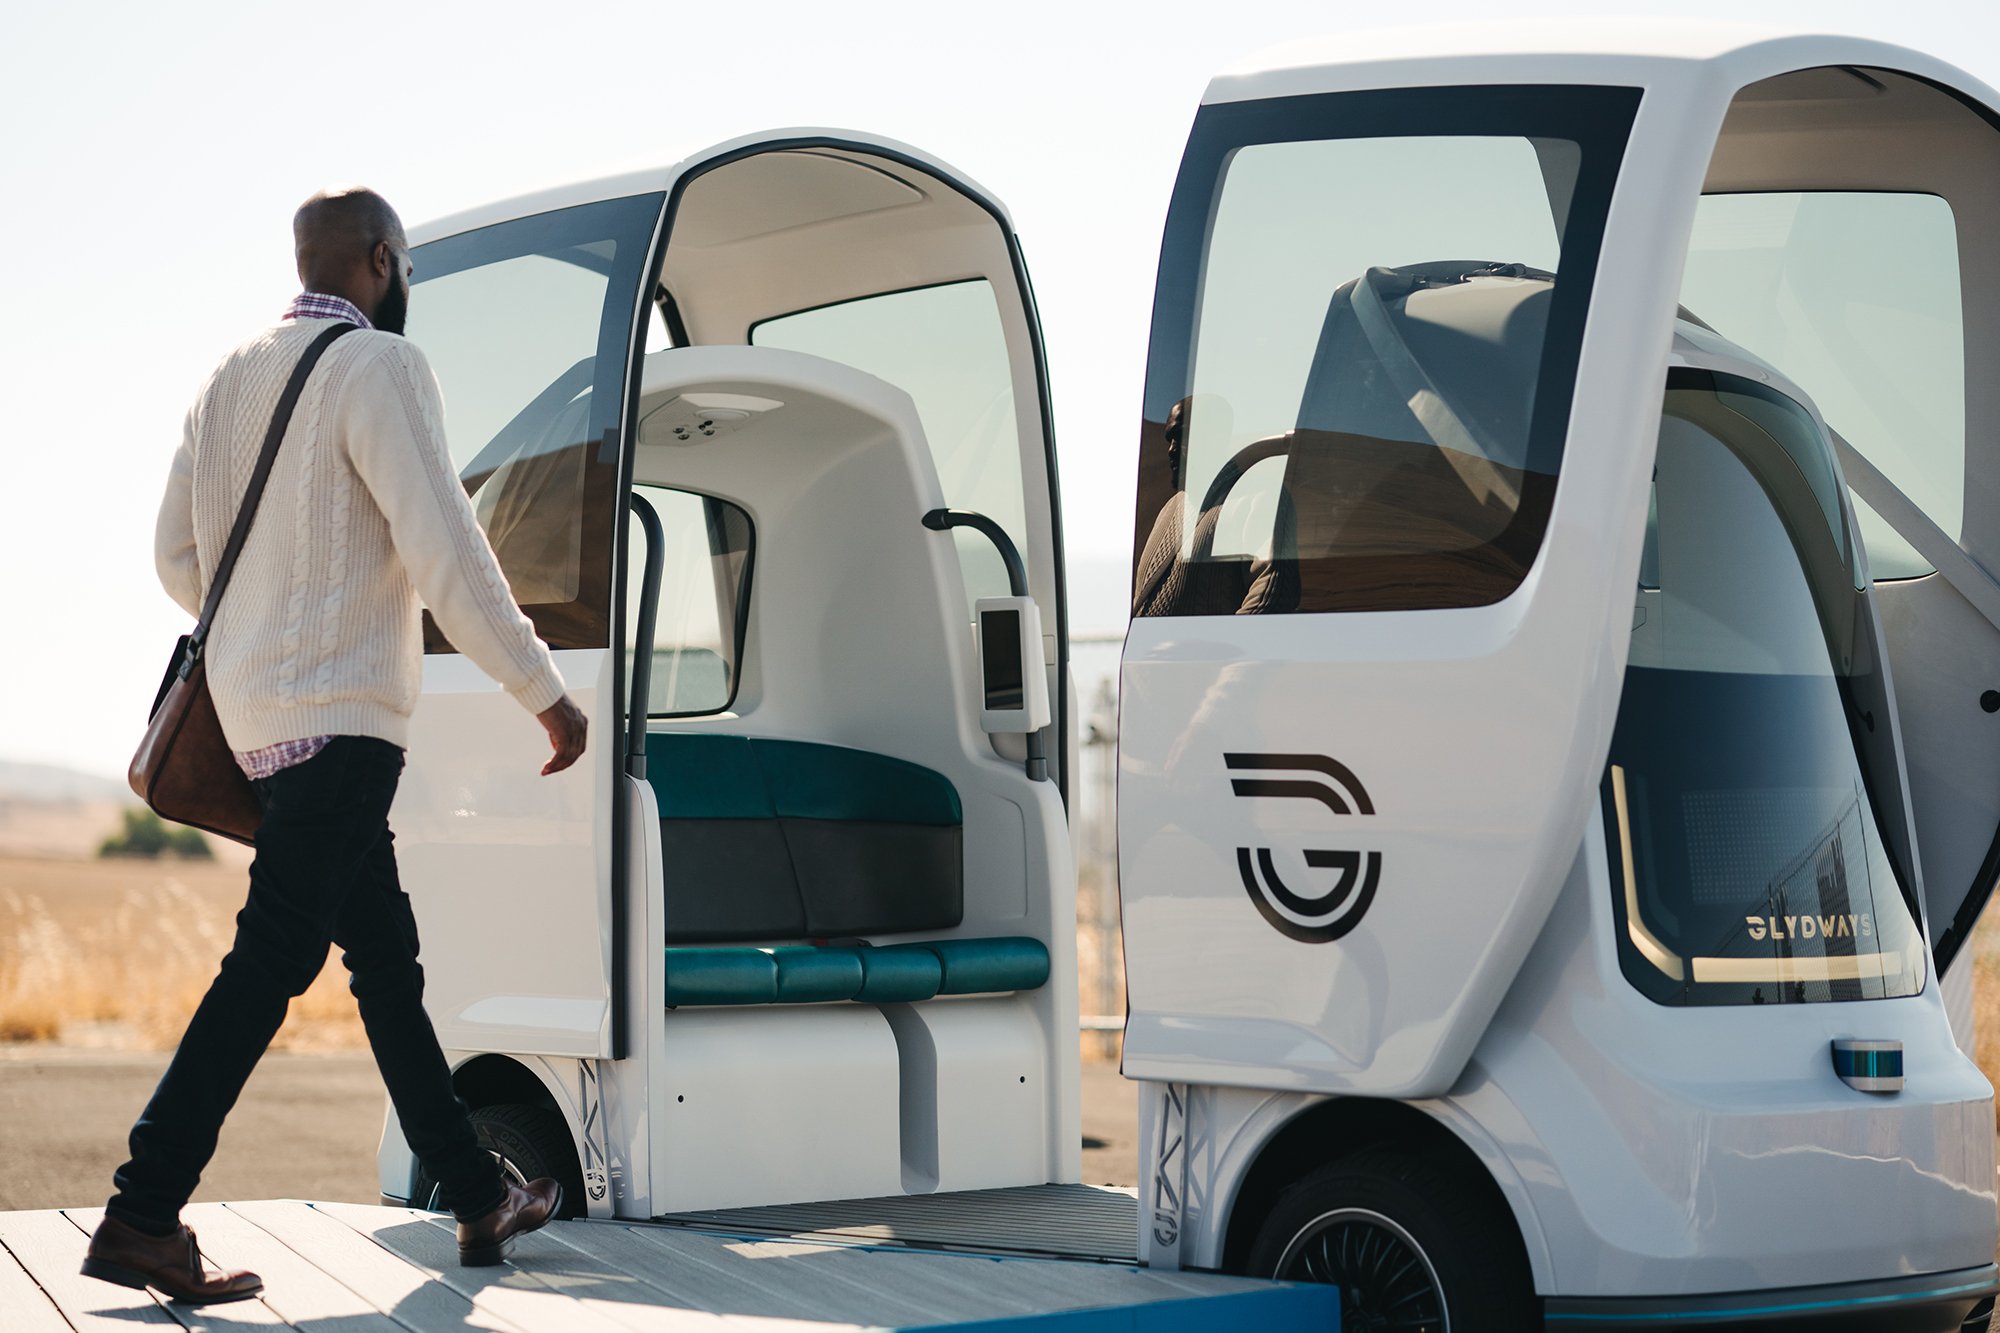 Glydways offering autonomous, personal Glydcars for up to 4 passengers